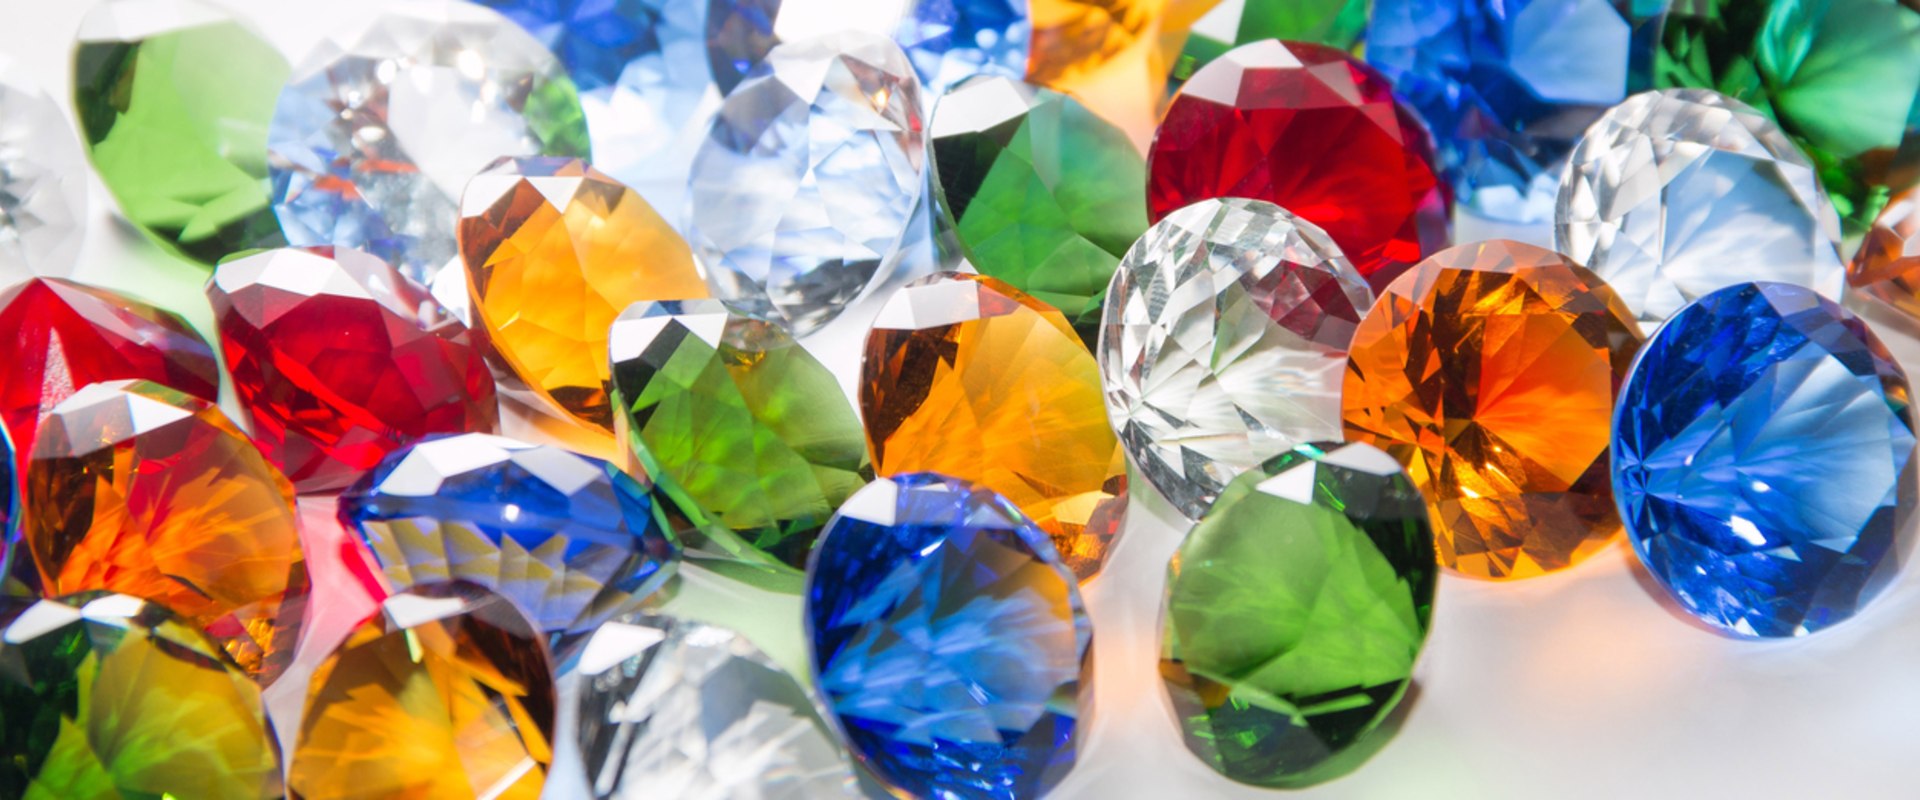 What does precious stones symbolize in the bible?